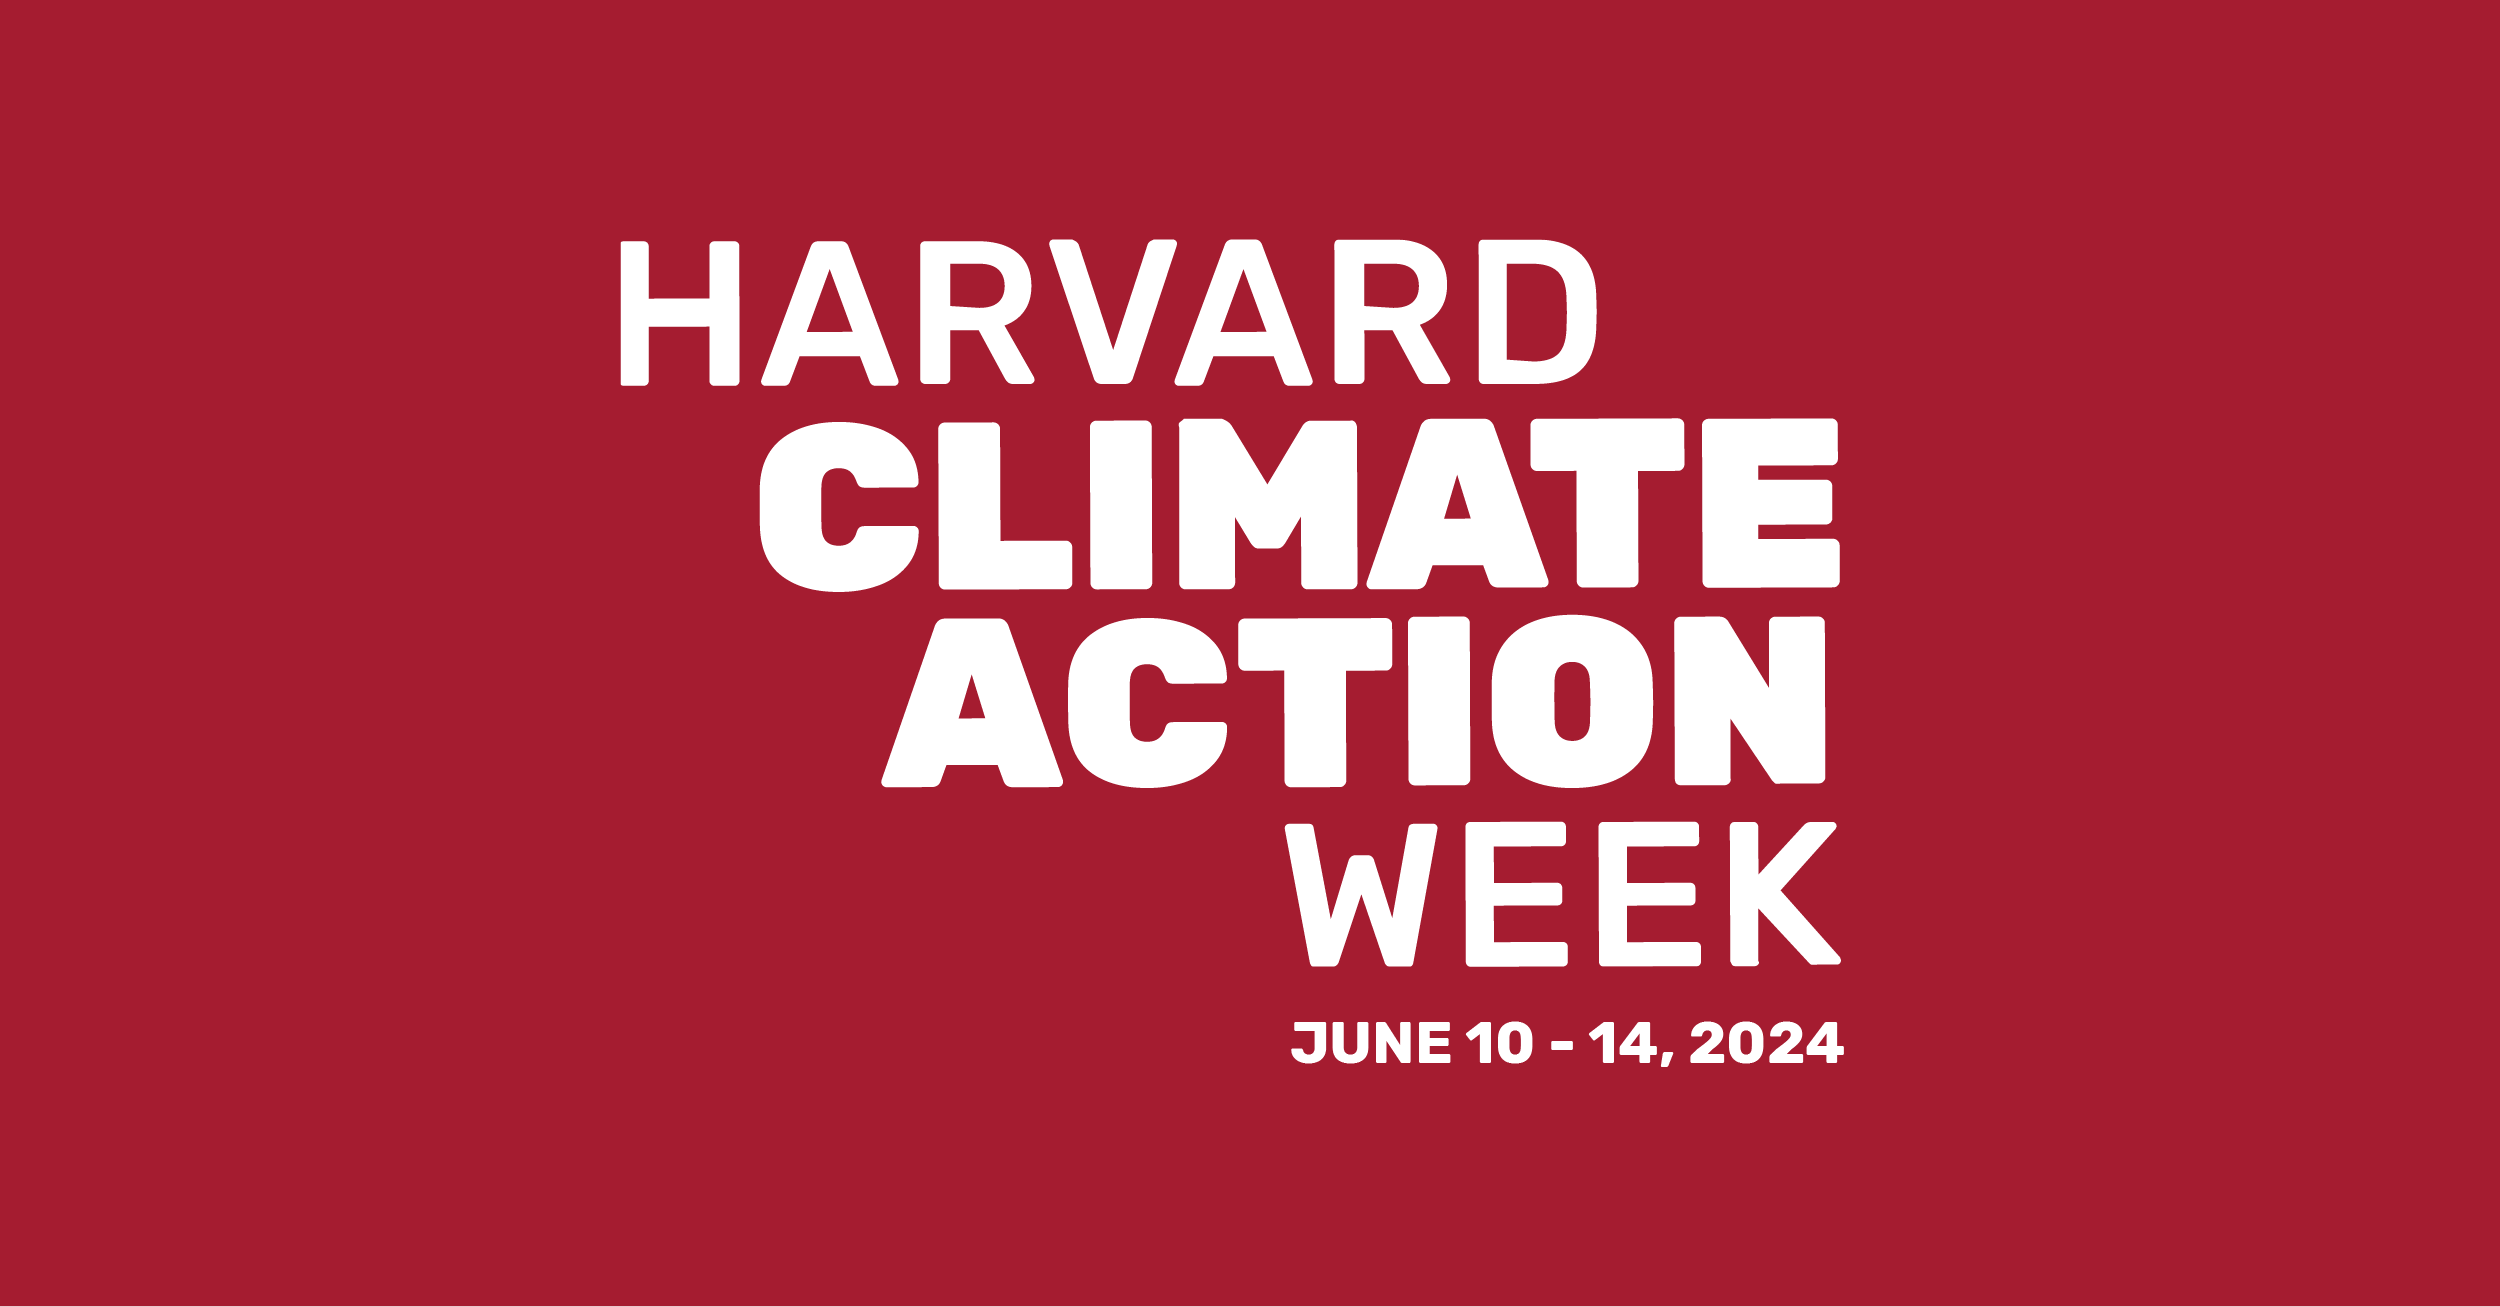 Crimson graphic with white text: "Harvard Climate Action Week. June 10-14, 2024"